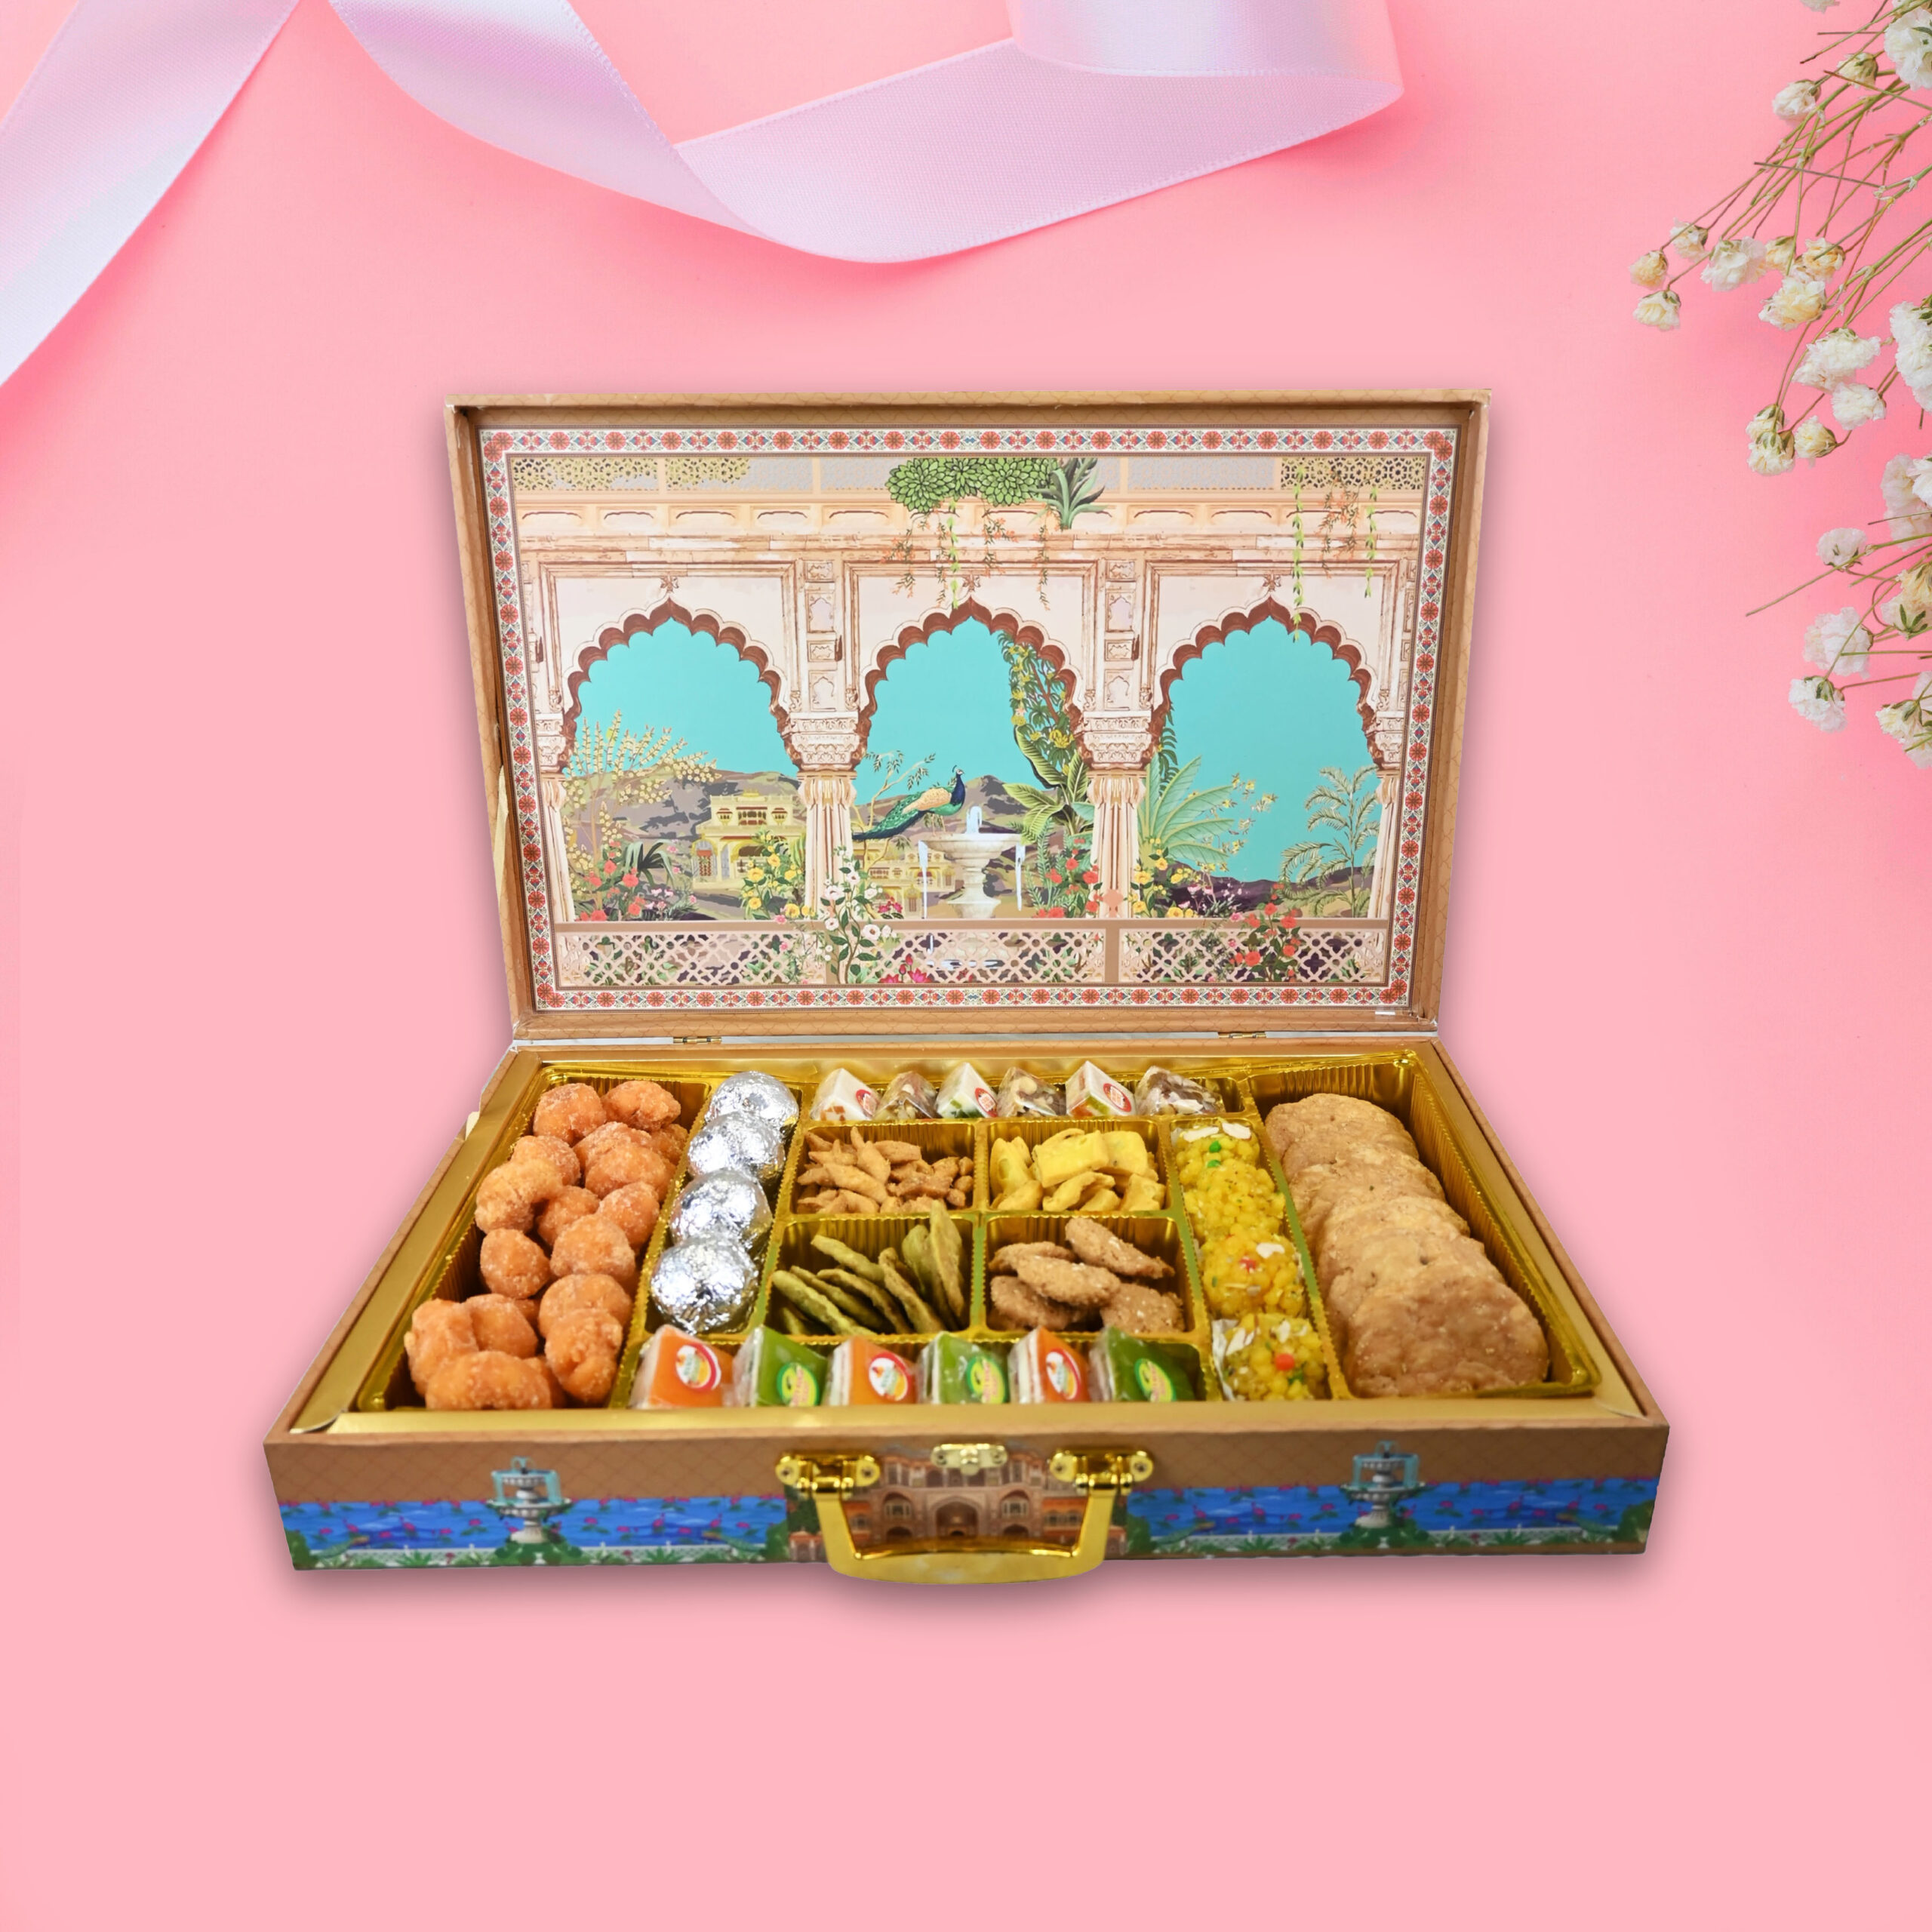 Choosing the Right Sweet Box for Every Celebration